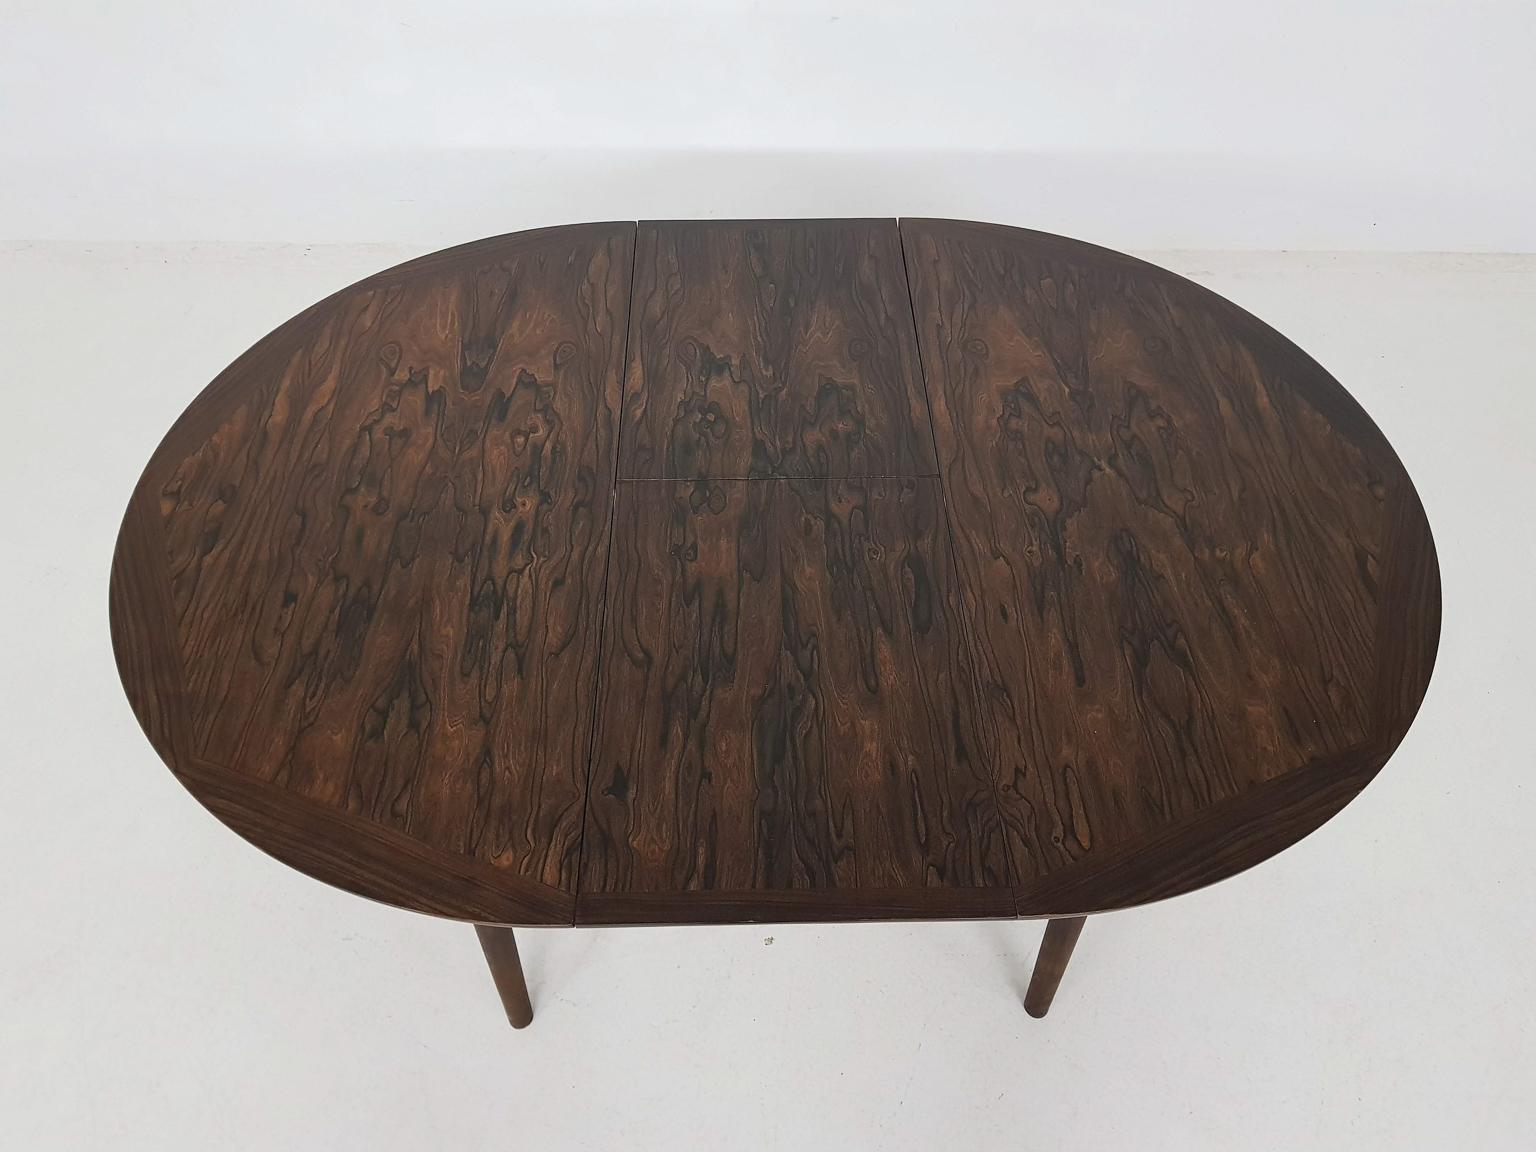 Mid-20th Century Rosewood Mid-Century Modern Set of Dining Table and Chairs, Dutch Design 1960s